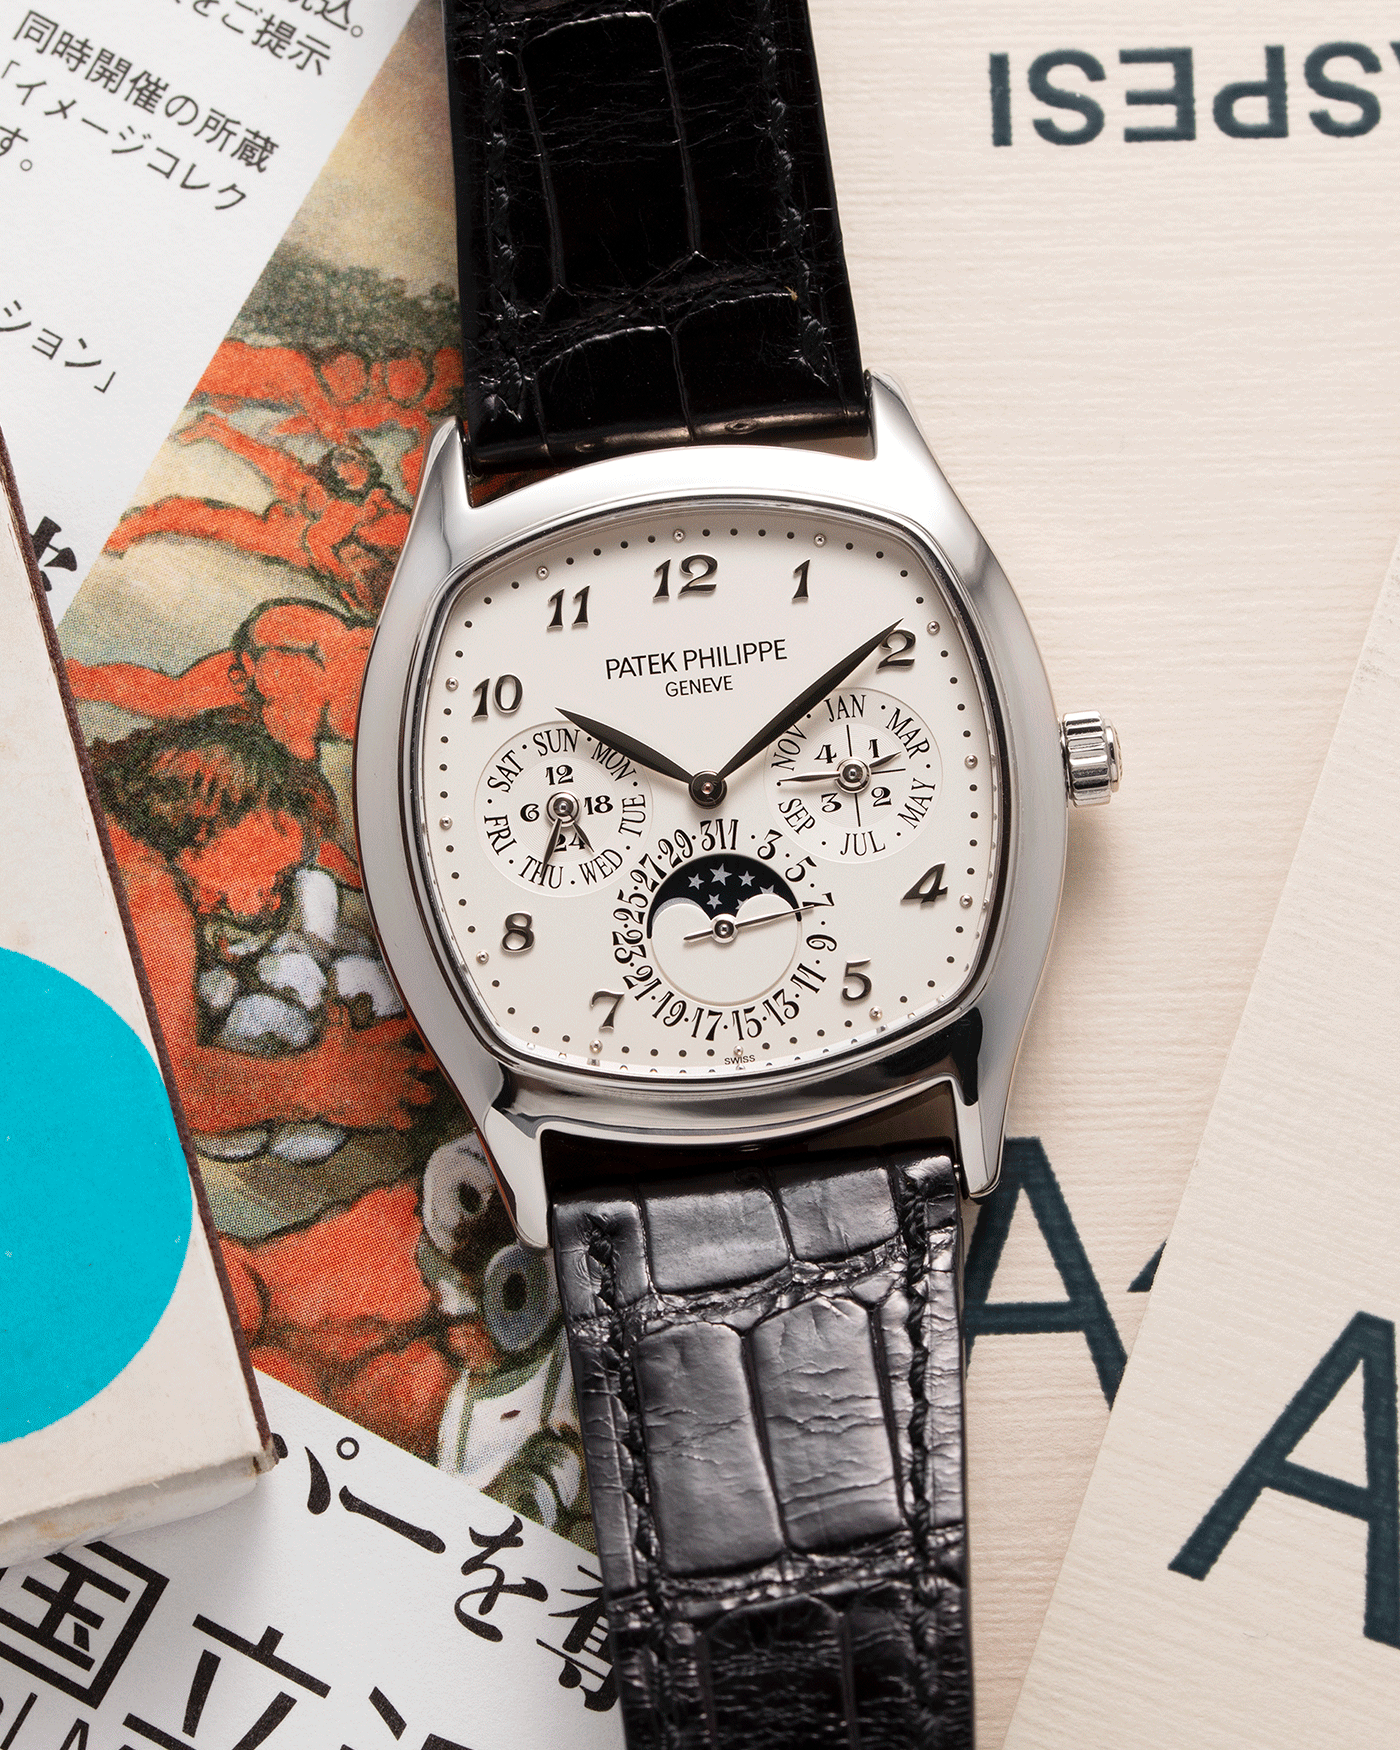 Brand: Patek Philippe Year: 2018 Model: Perpetual Calendar Reference Number: 5940G Material: White Gold Movement: Cal 240Q Case Diameter: 37mm Bracelet: Patek Philippe Black Alligator Strap with White Gold Tang Buckle